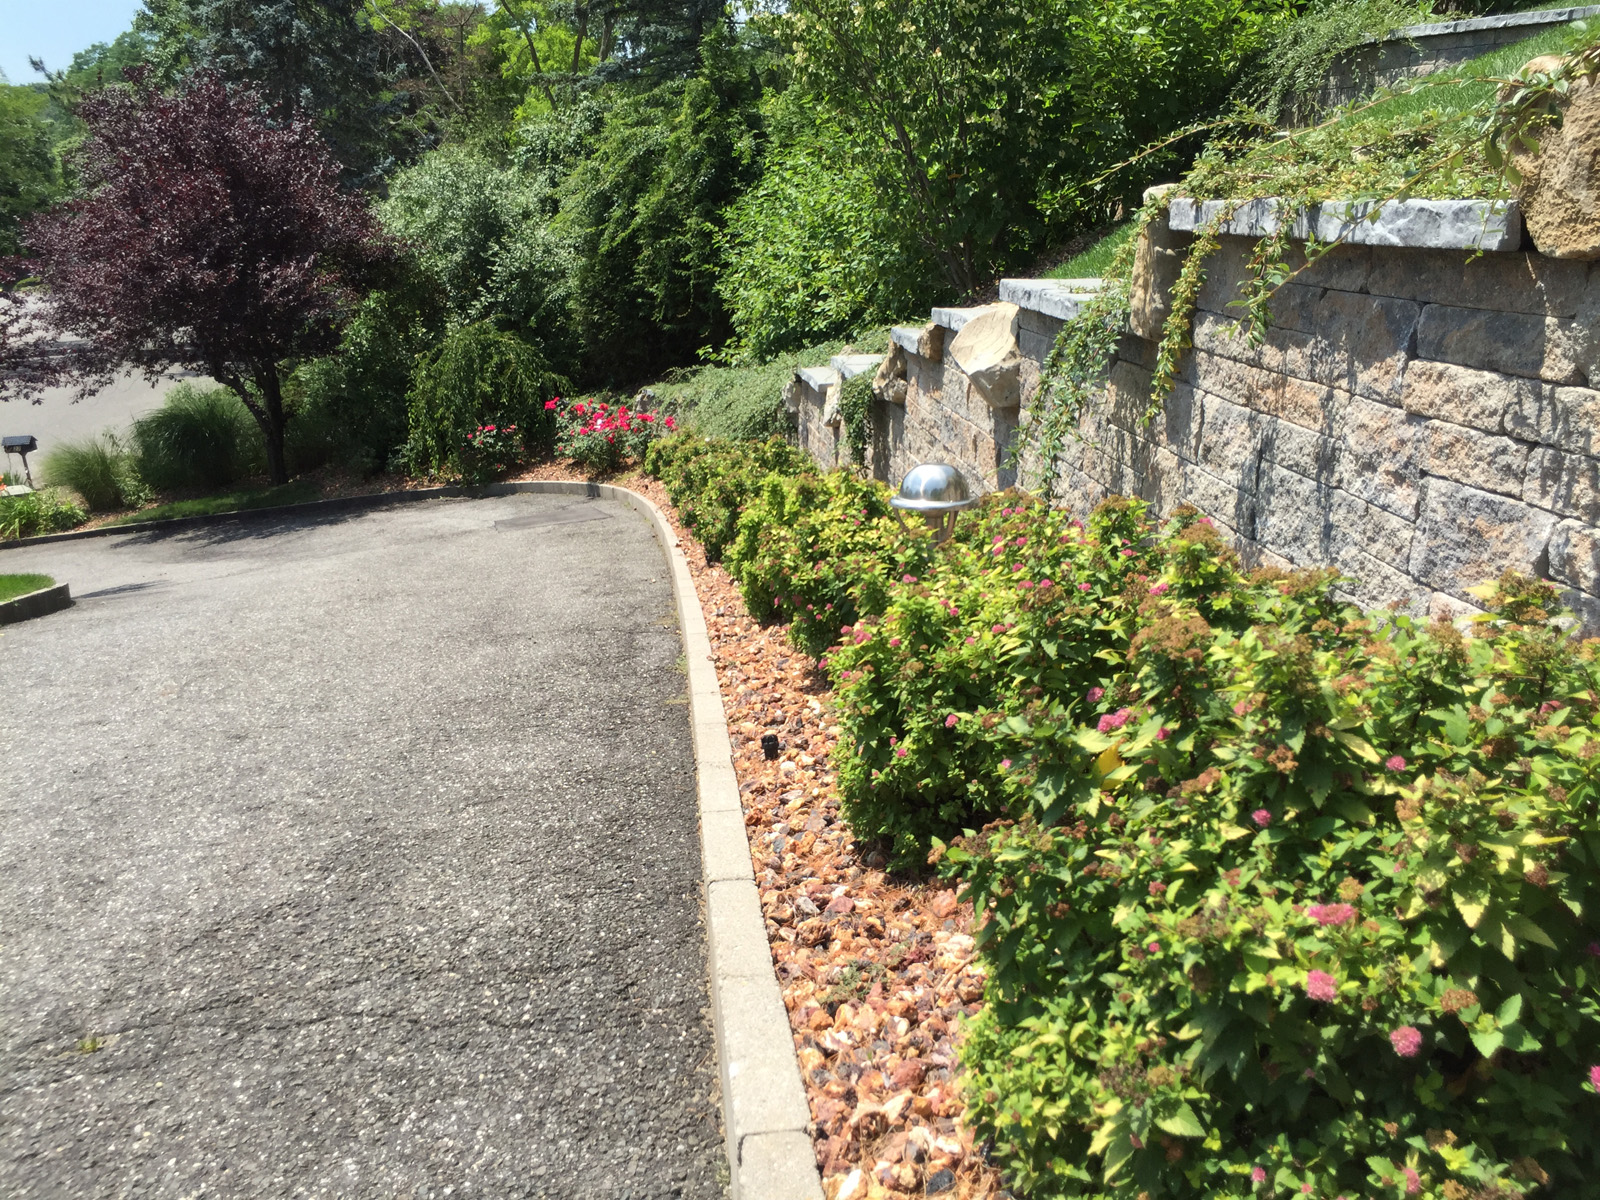 Landscape design with driveway in Long Island, NY​​​​​​​